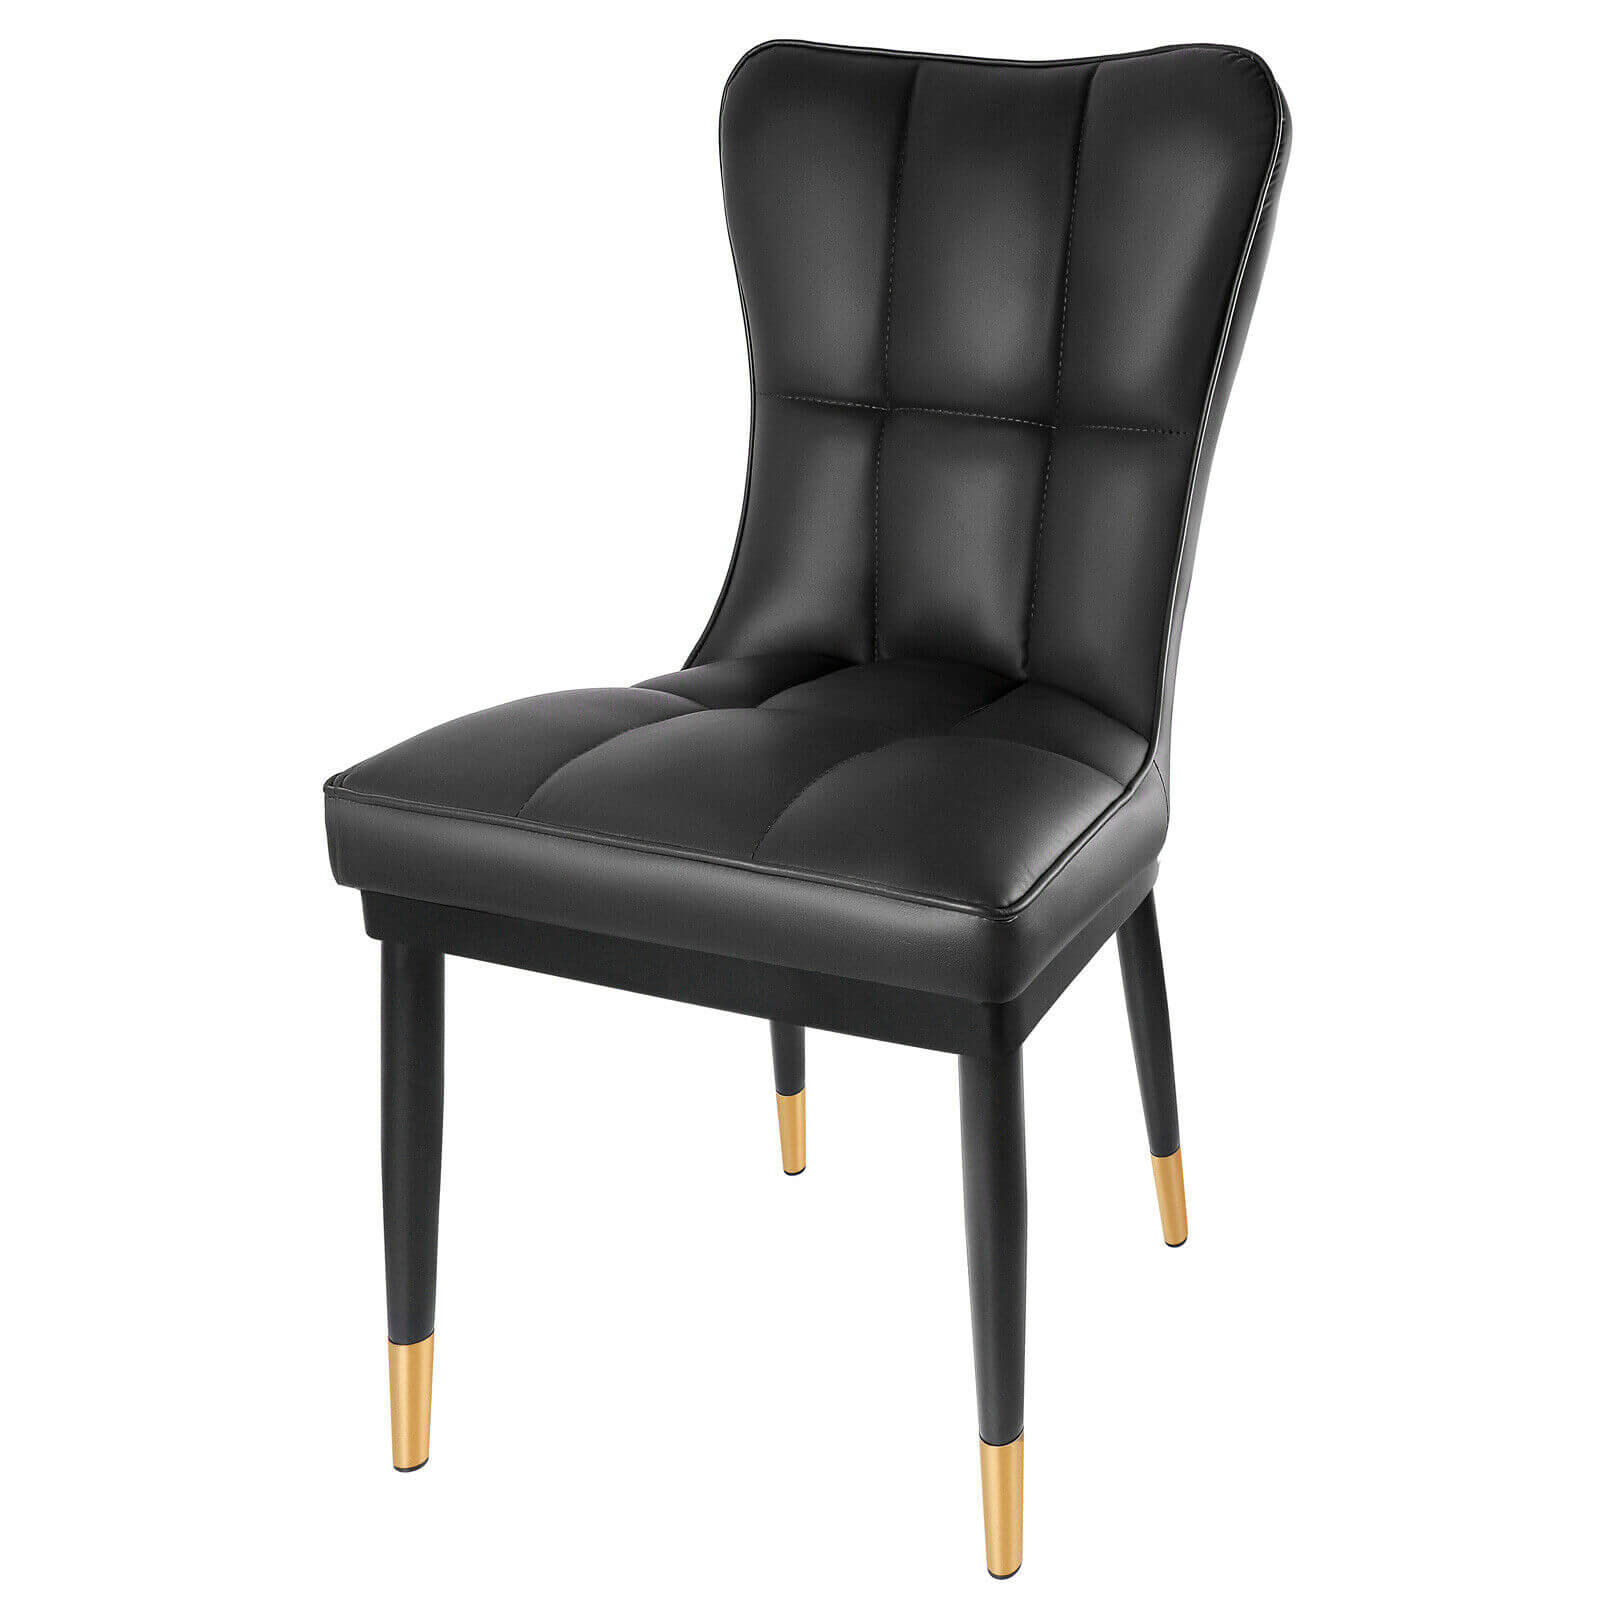 Black soft leather dining chair